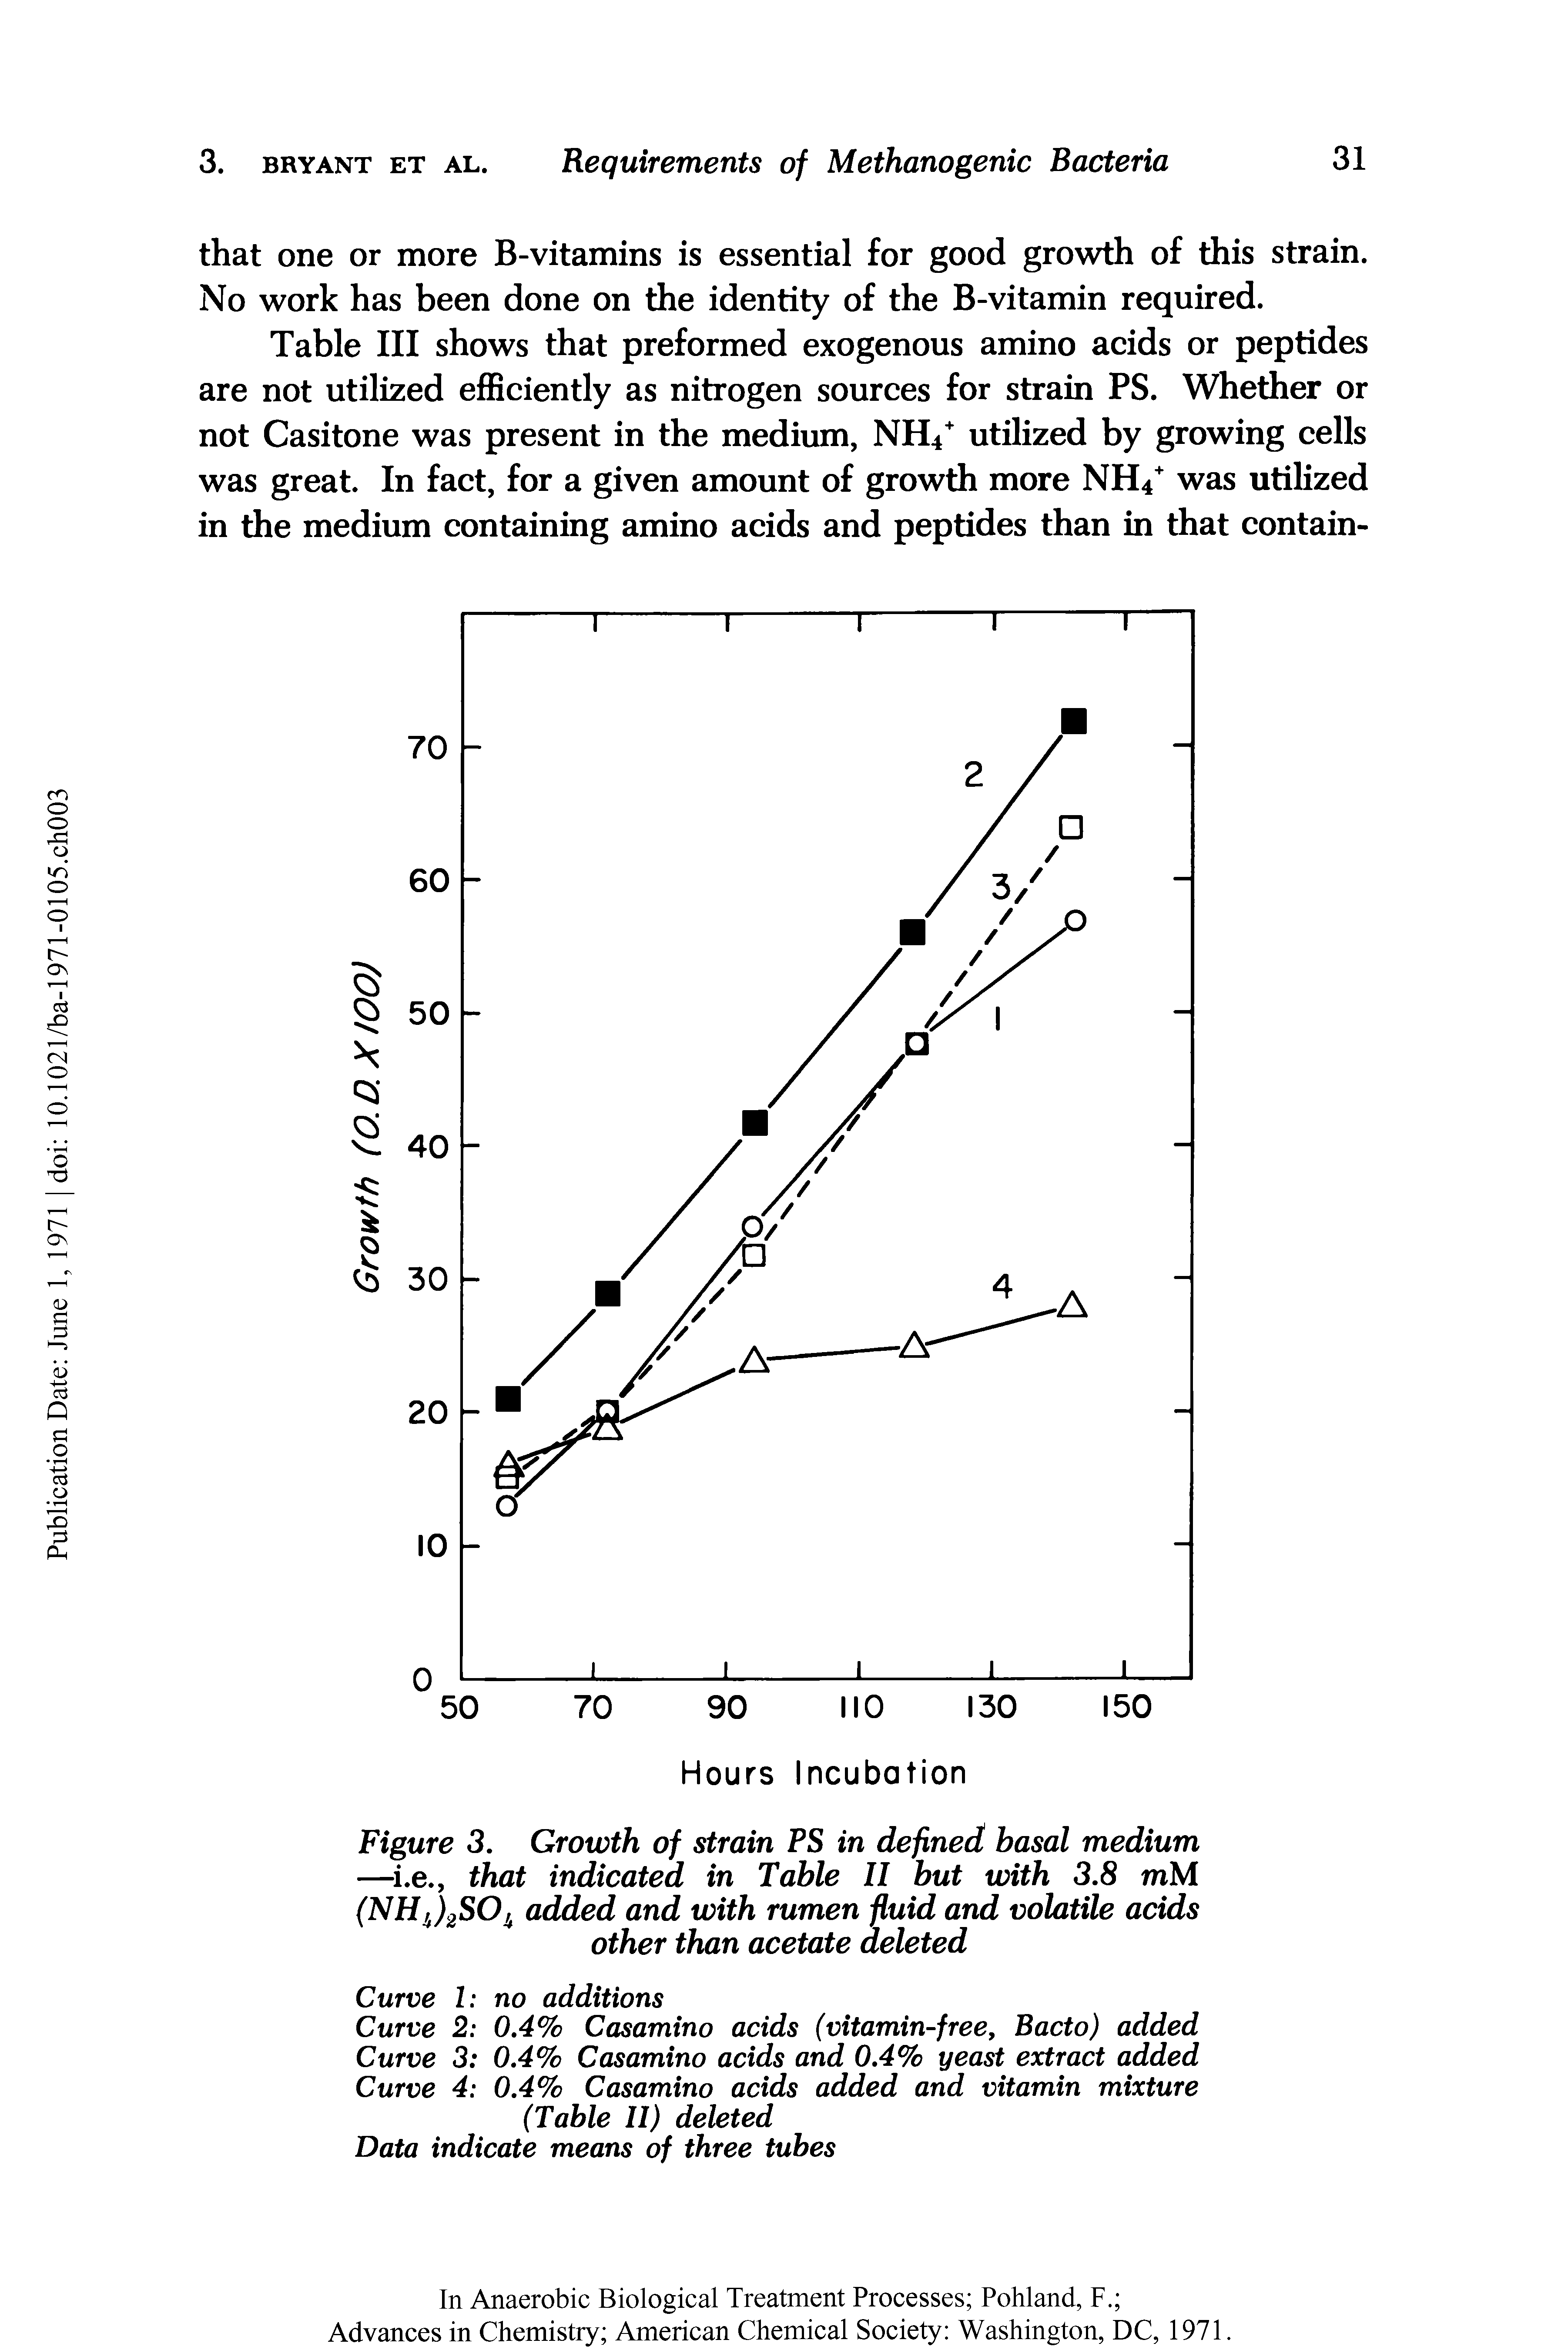 Figure 3. Growth of strain PS in defined basal medium —Le., that indicated in Table II but with 3.8 mM (NHJ2S0 added and with rumen fluid and volatile acids other than acetate deleted...